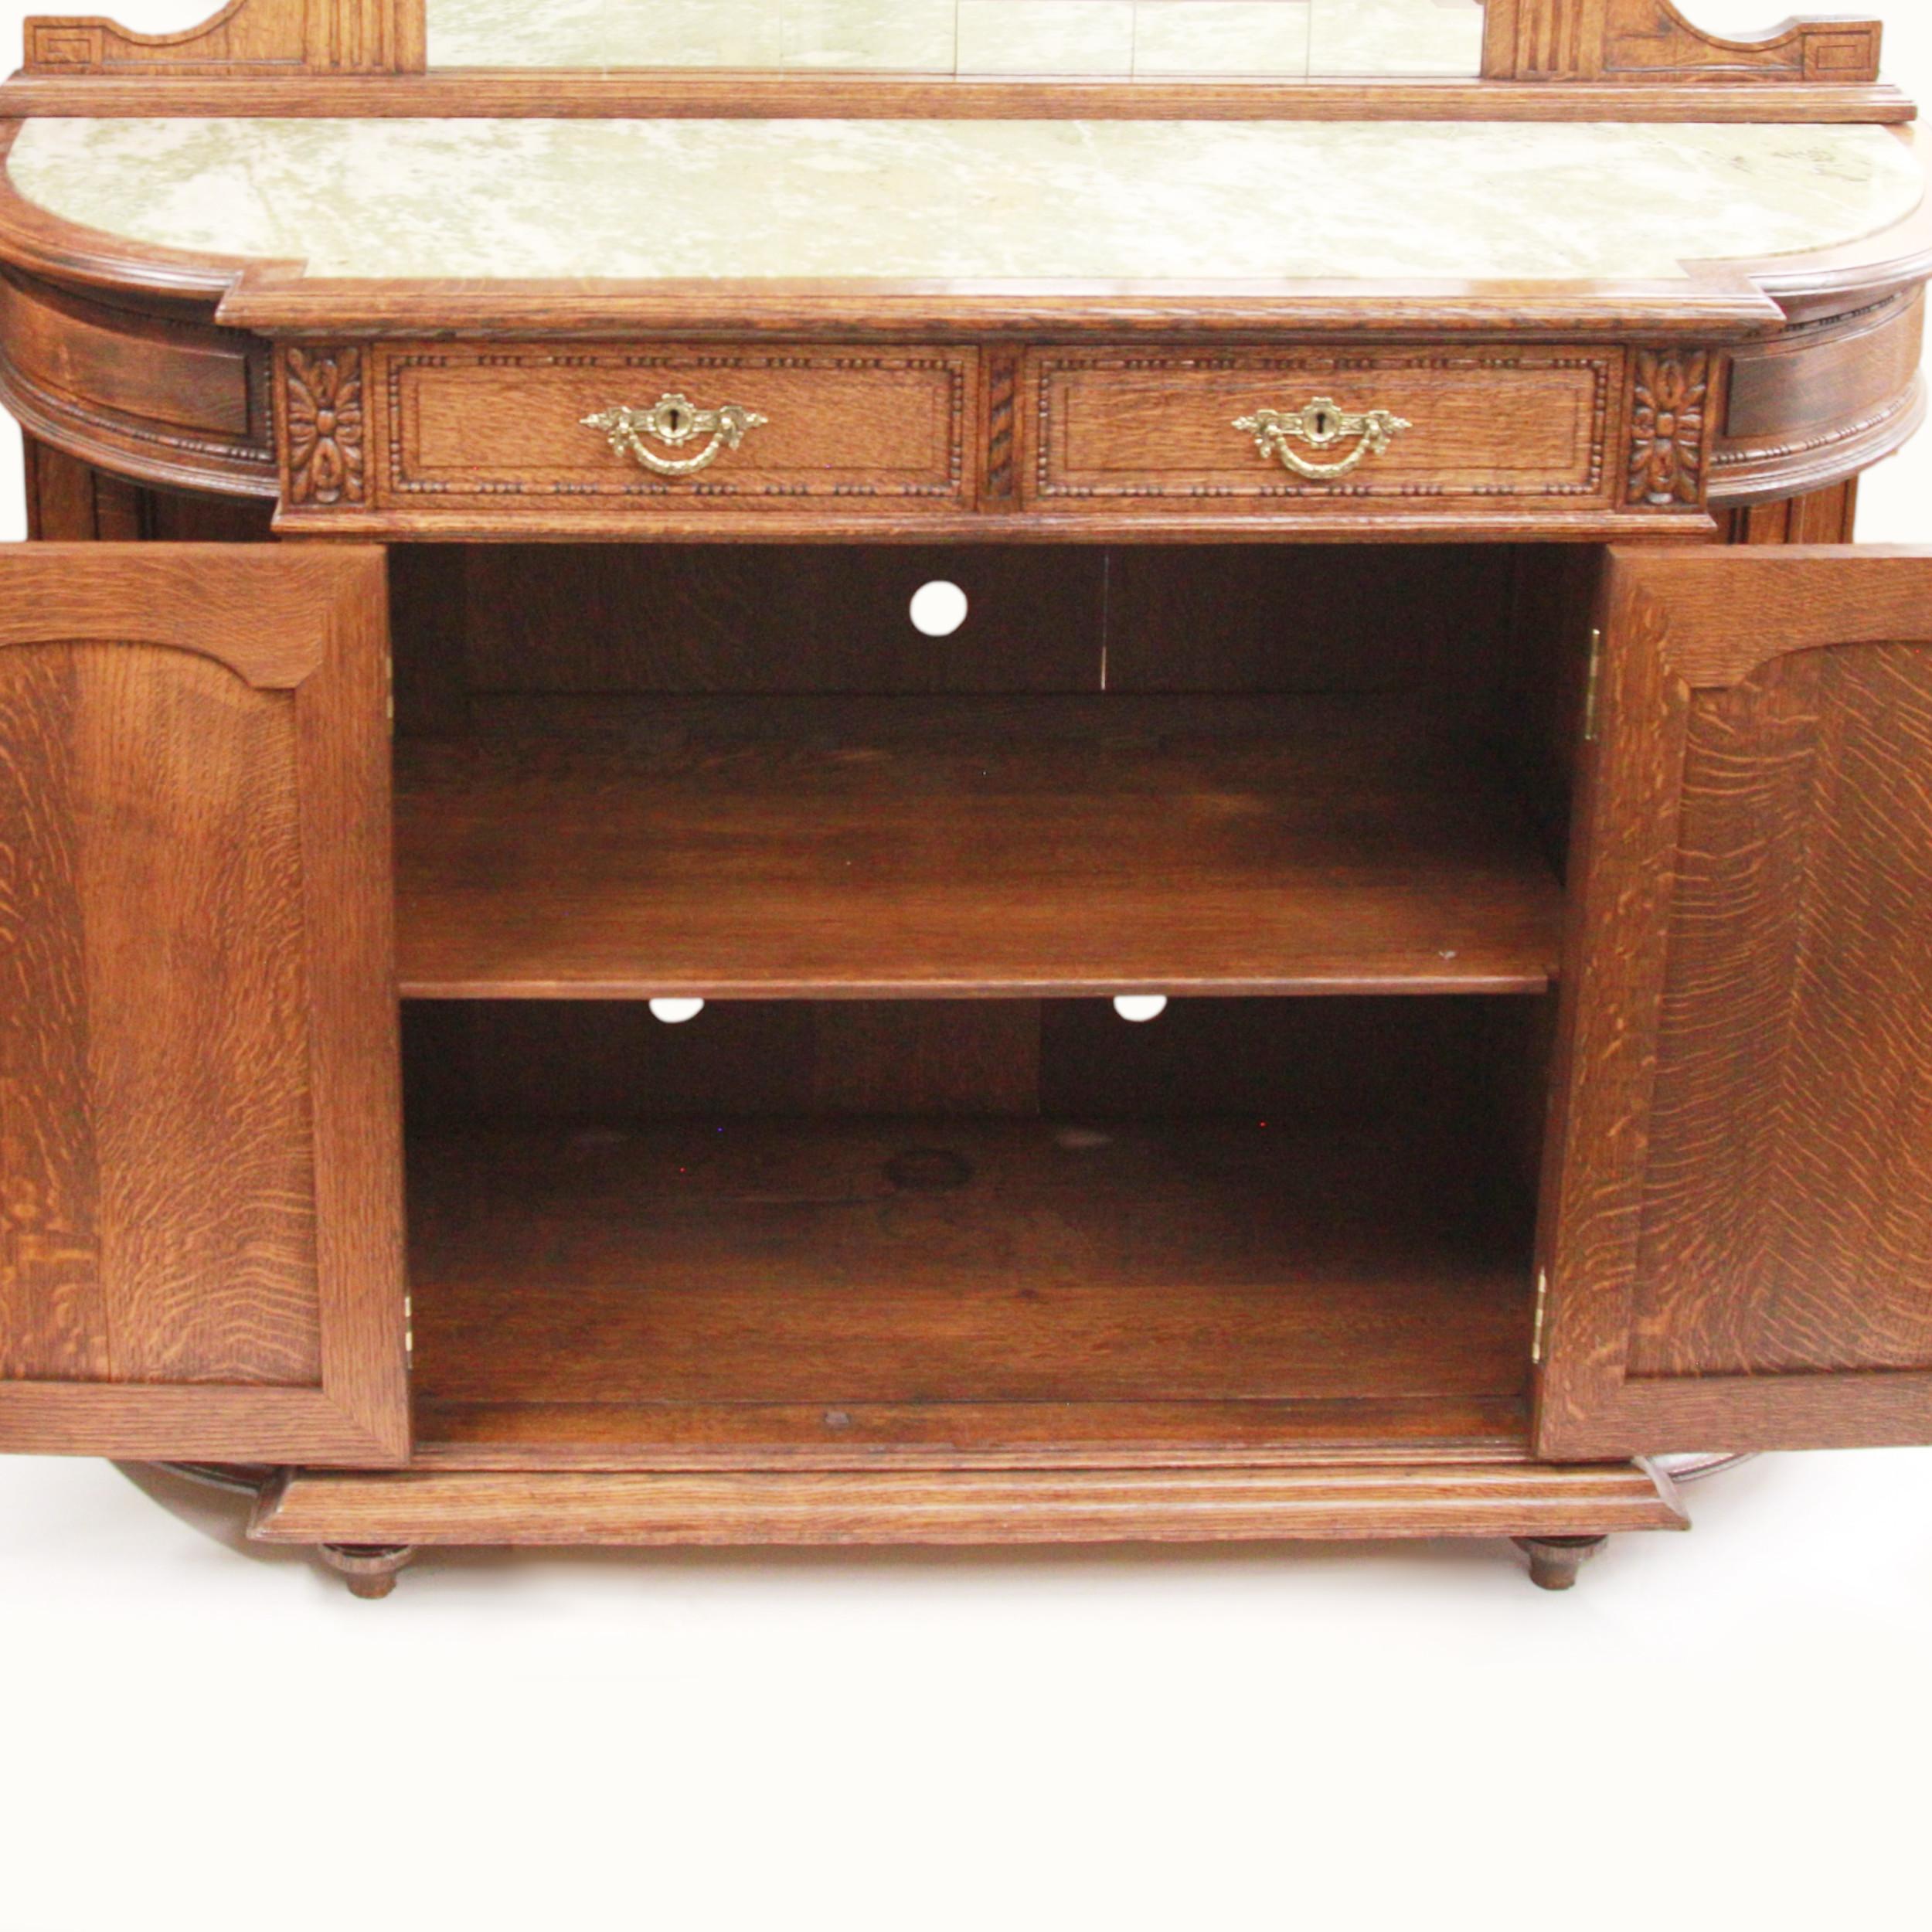 Late 19th Century Dutch Carved Oak & Marble Buffet Sideboard In Good Condition For Sale In Lafayette, IN